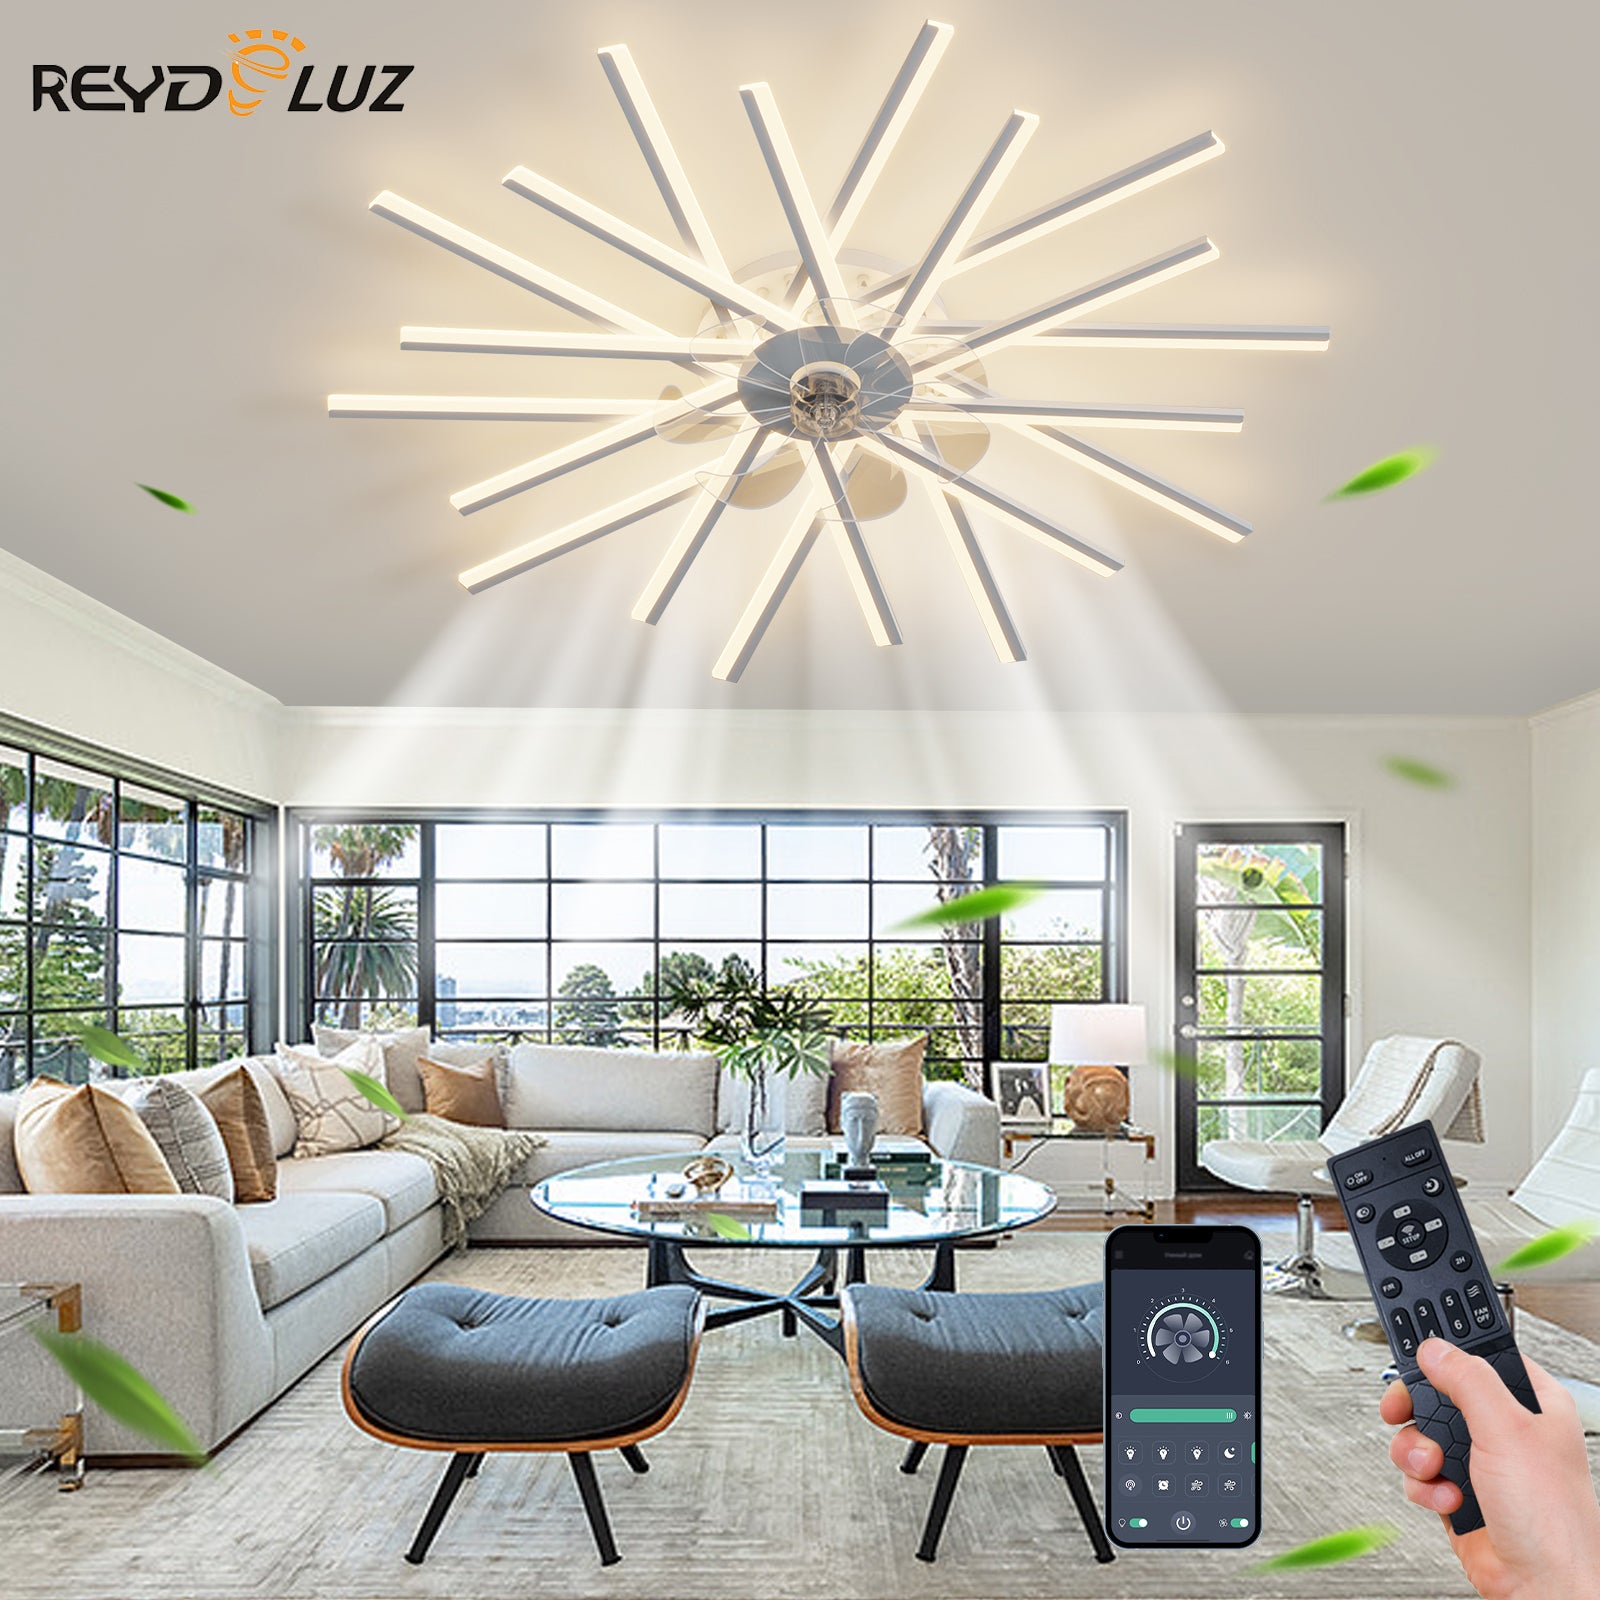 REYDELUZ Ceiling Fan with Lights, Led Ceiling Fan Bedroom Ceiling Lamp Remote Control 3 Colors Switching Dimming Intelligent 6 Wind Speed Living Room Fan Ceiling Lamp.